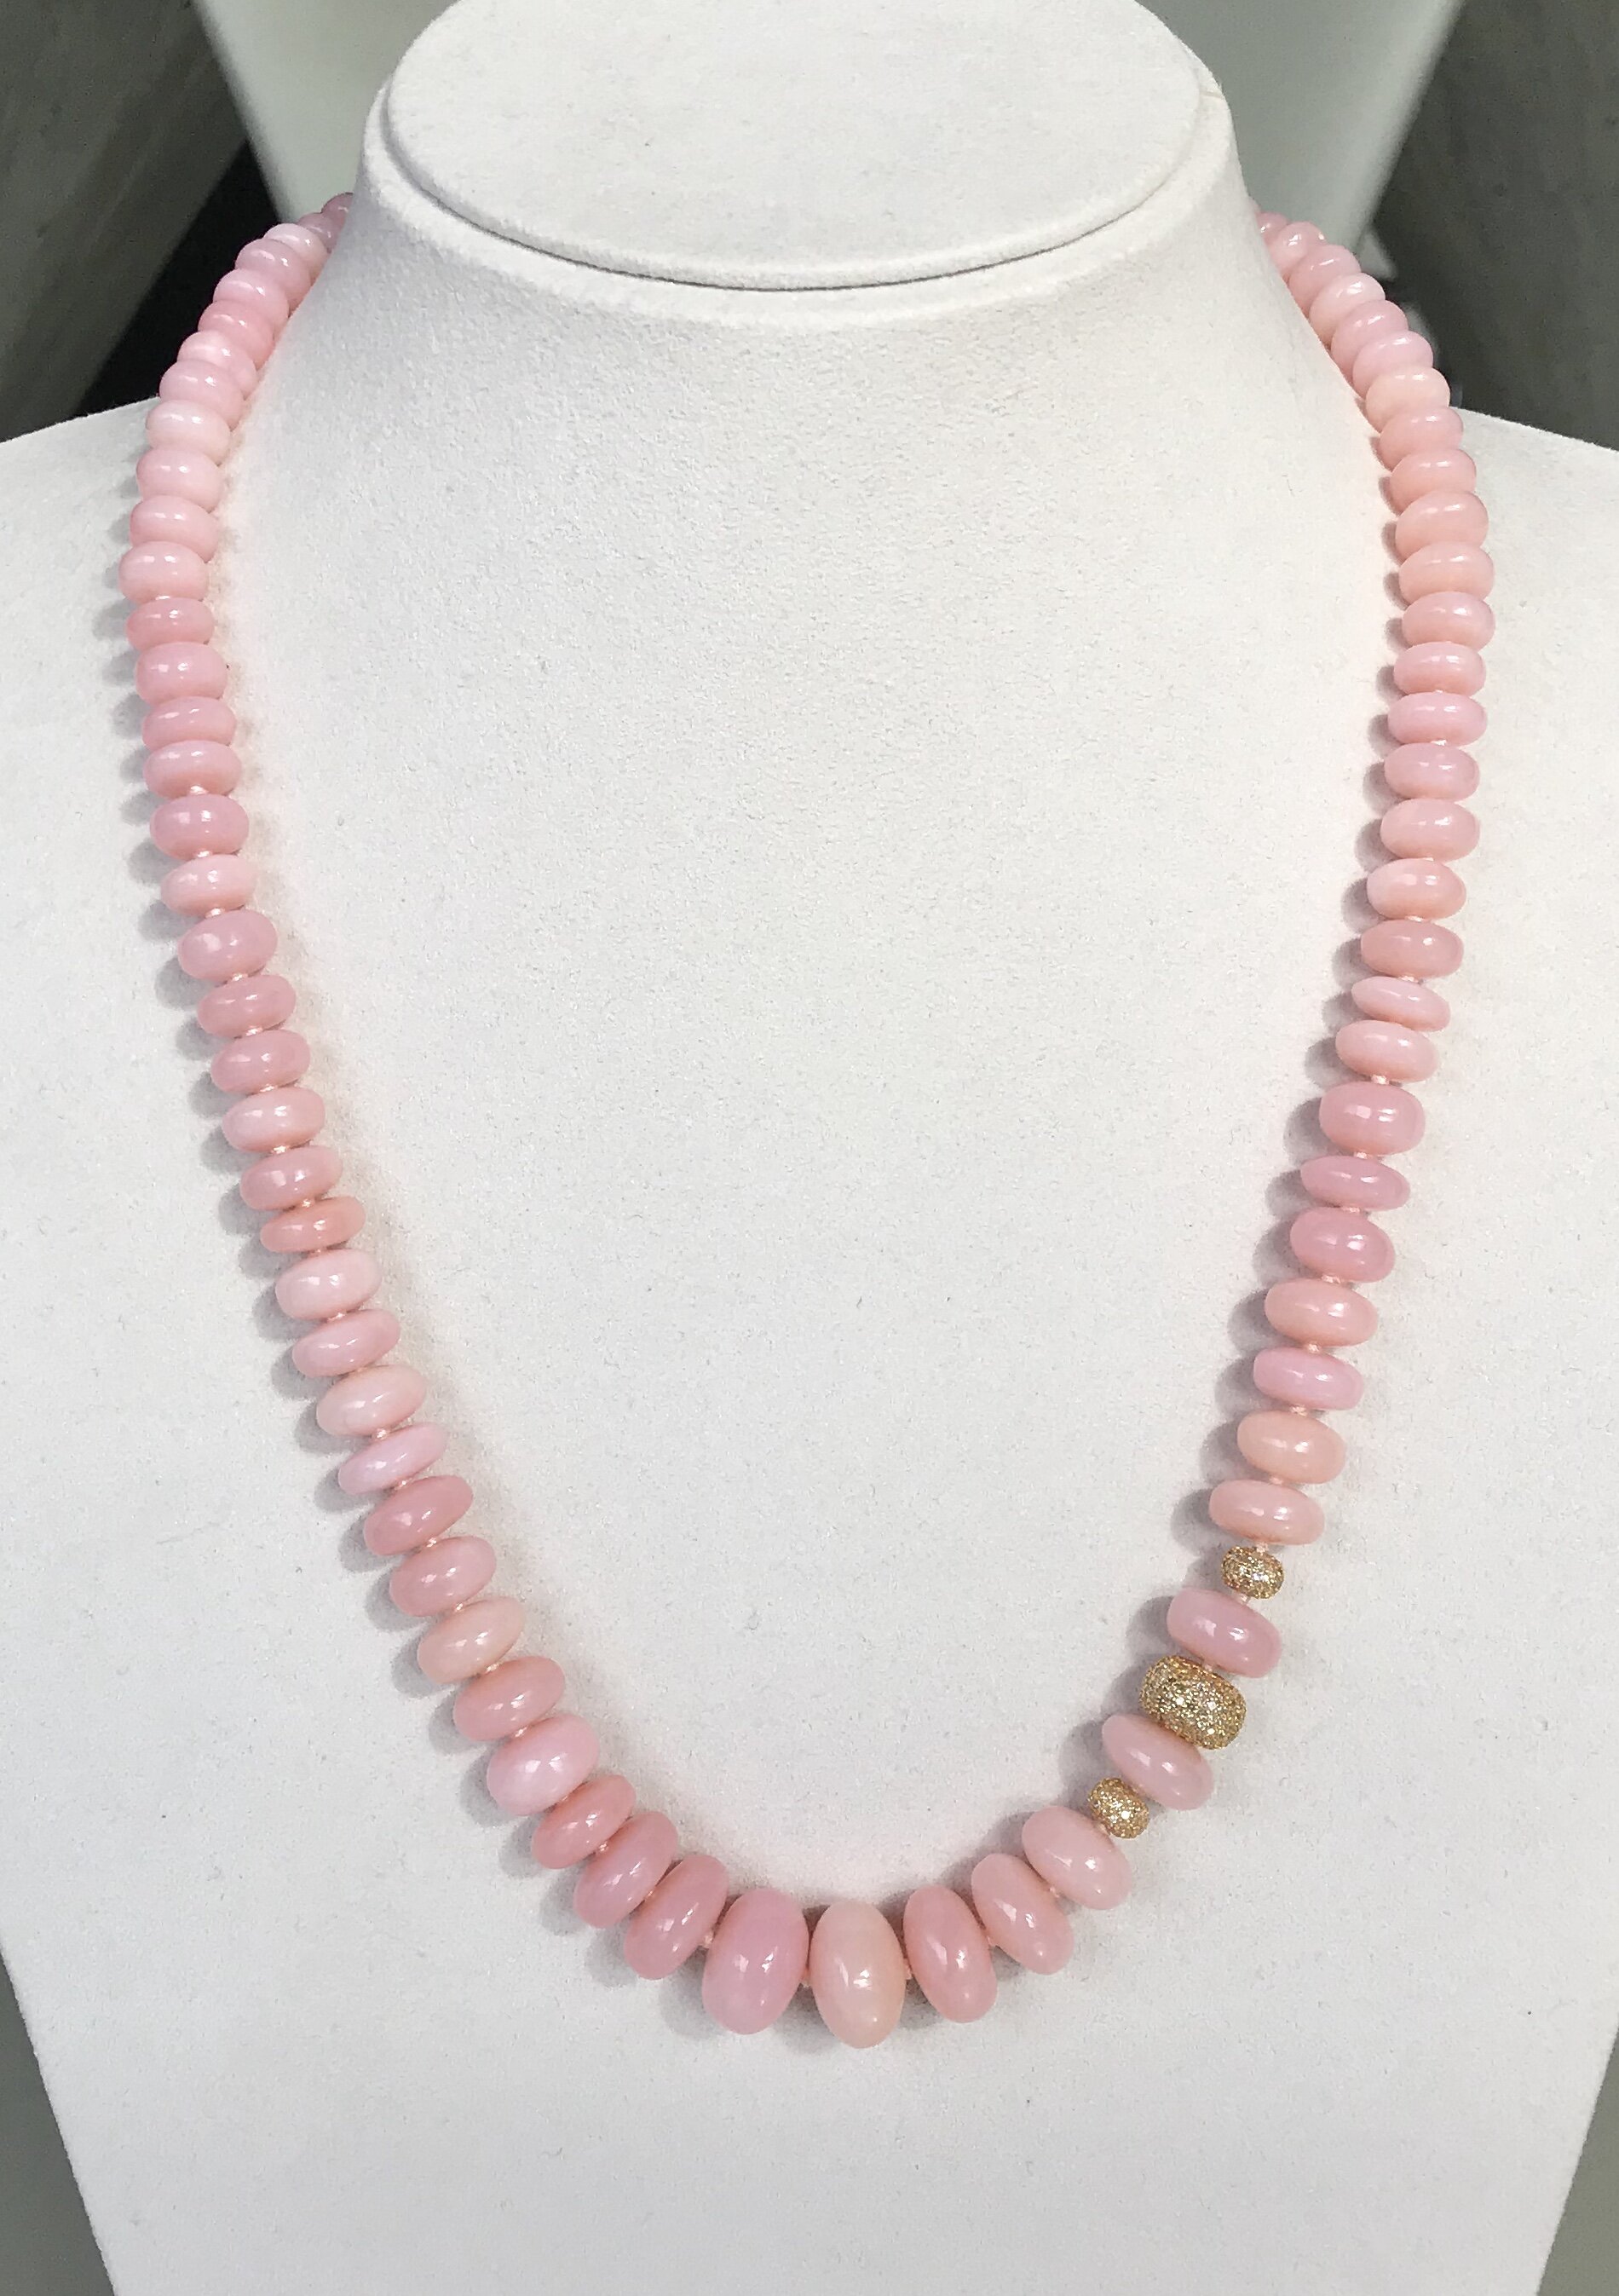 Heishi bead necklace women, vinyl heishi beads, Pink statement necklace,  Polymer Clay Necklace, choker for women, Polymer Bead Necklace